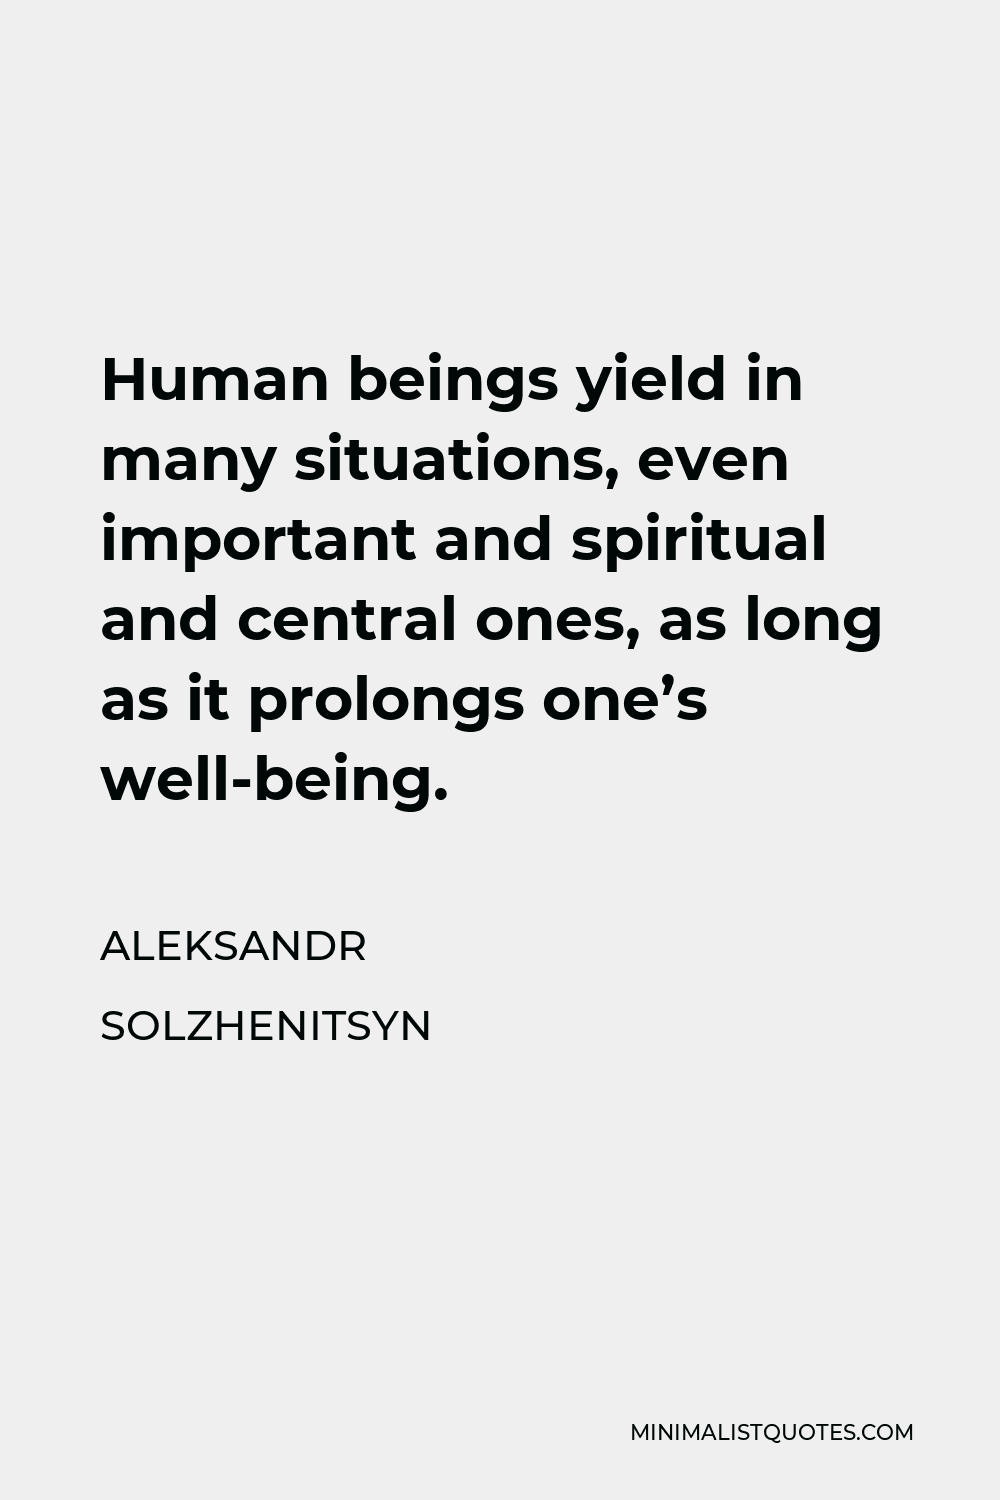 Aleksandr Solzhenitsyn Quote - Human beings yield in many situations, even important and spiritual and central ones, as long as it prolongs one’s well-being.